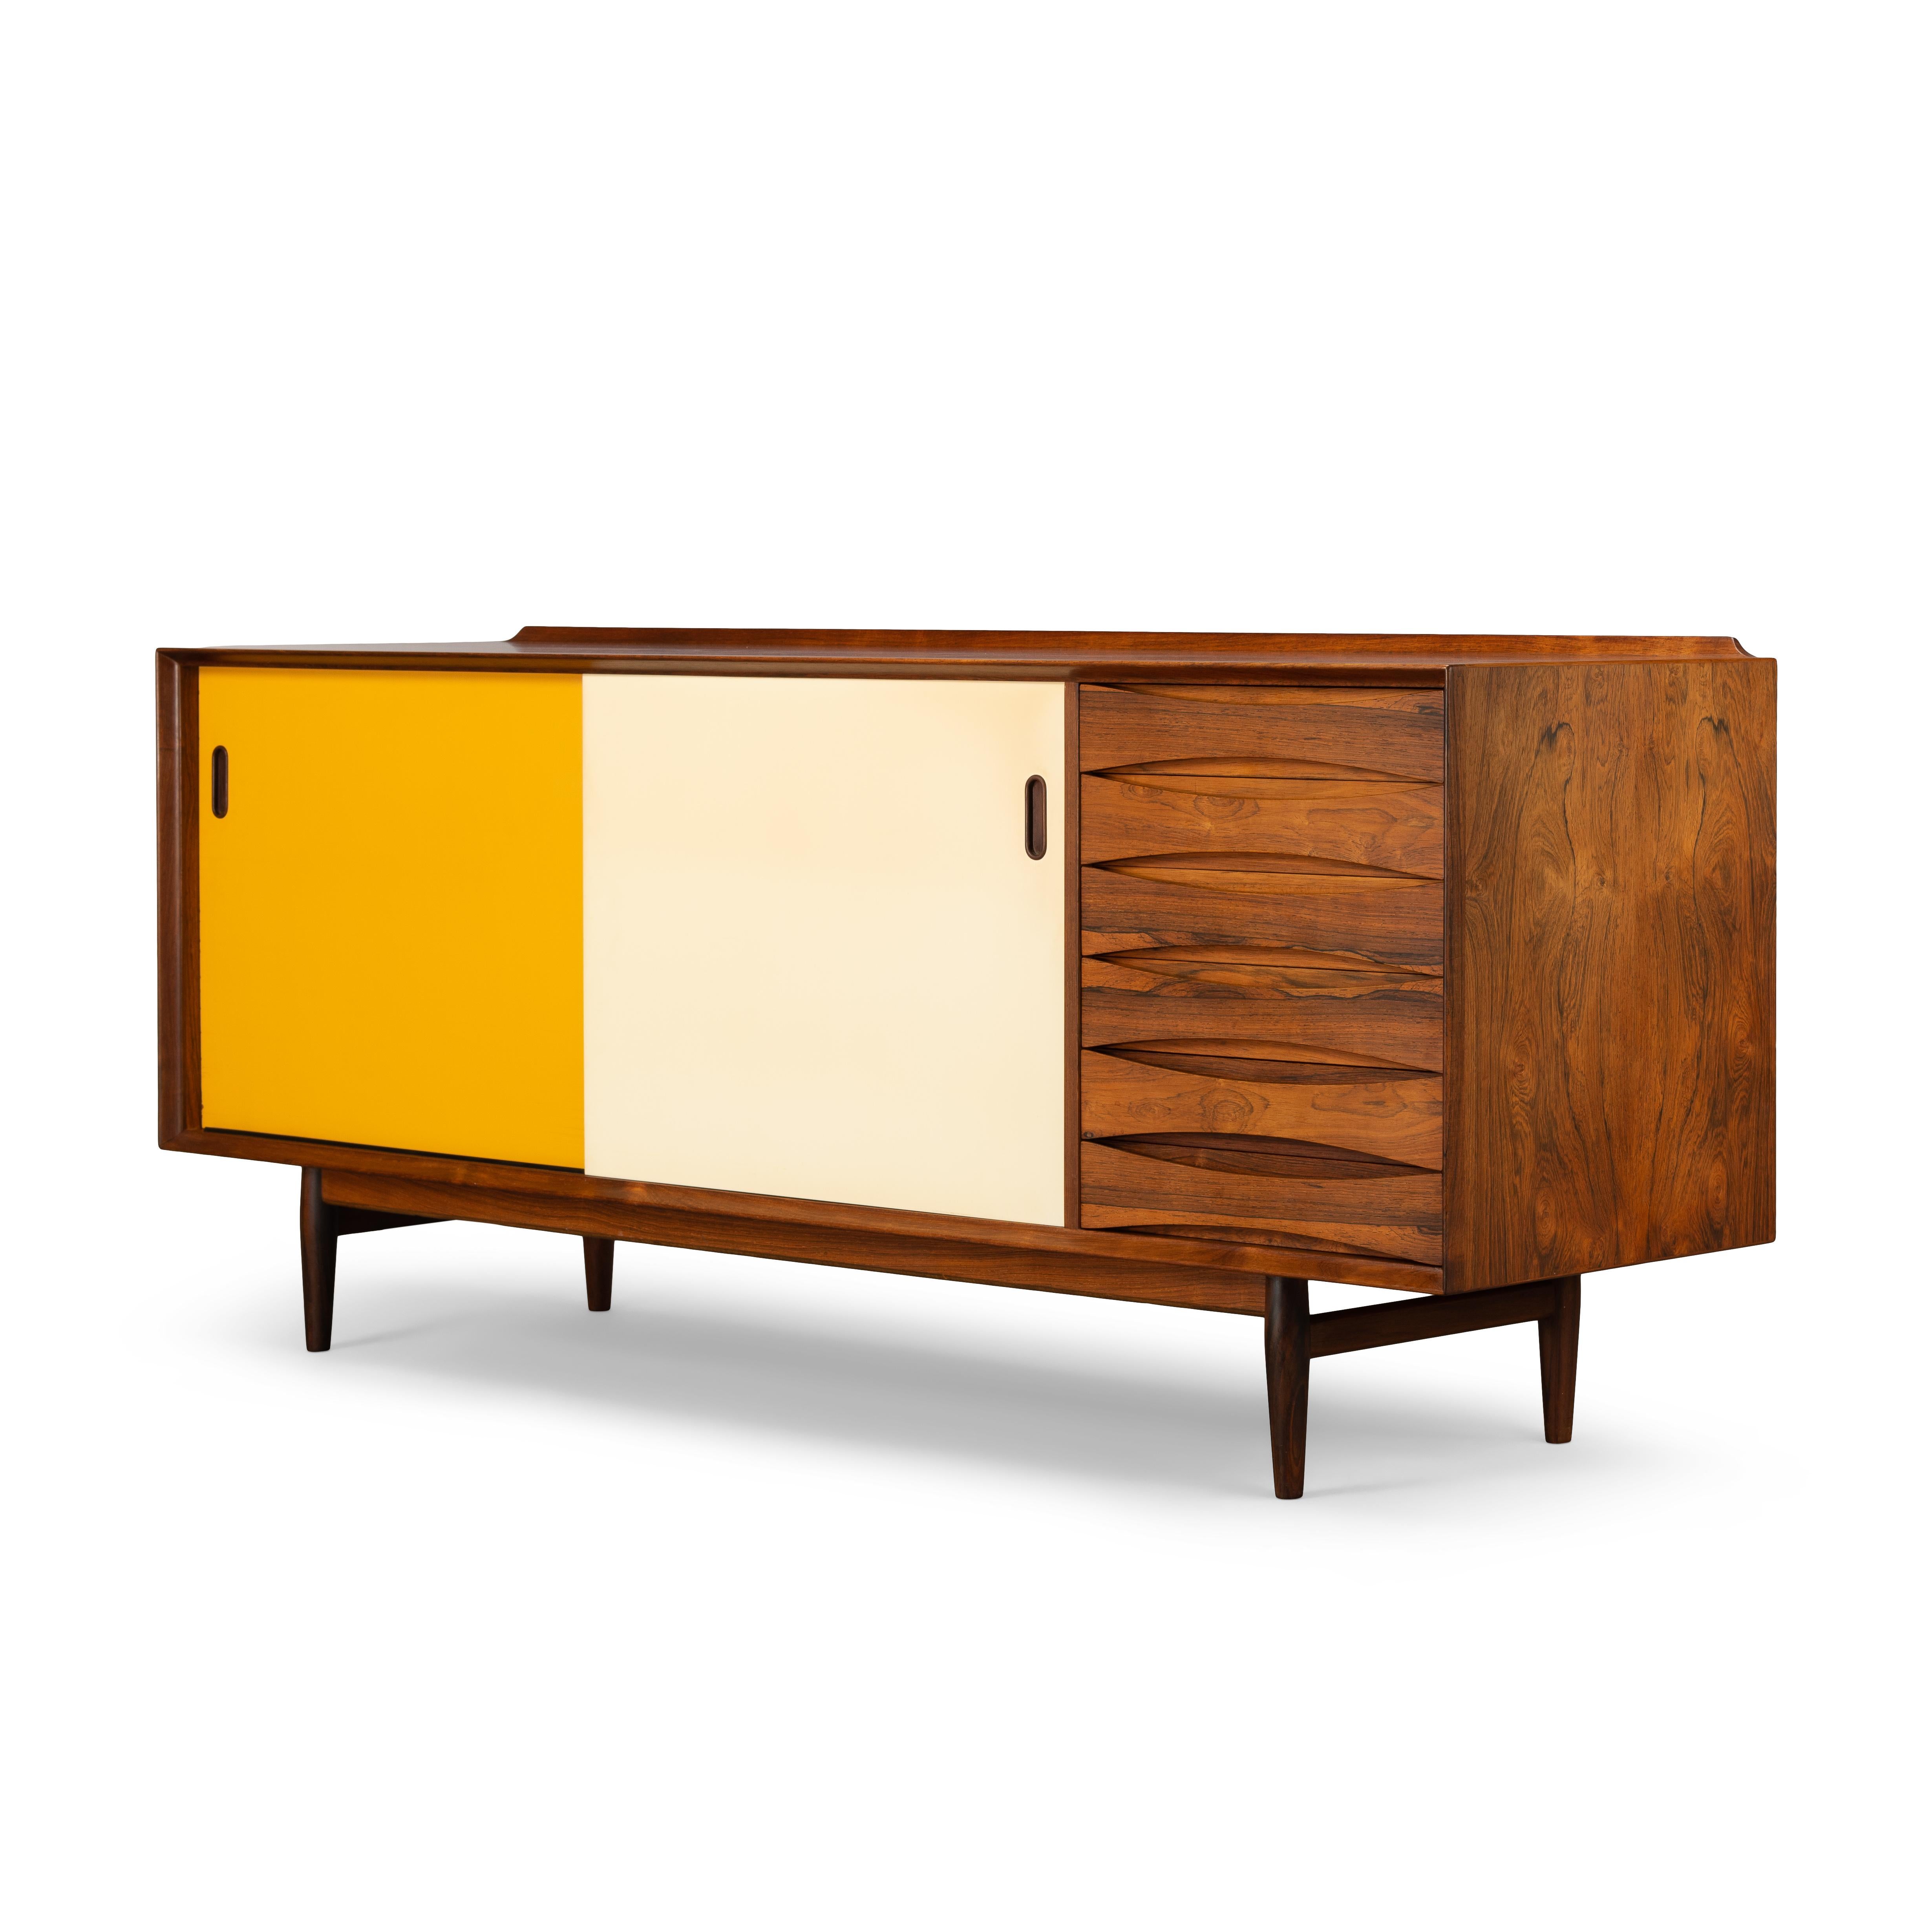 This model OS29 sideboard in rosewood by Arne Vodder for Sibast møbelfabrik is the epitome of high end Danish design cabinetry. And a rare find this gorgeous sideboard in rosewood. A design icon and highly desirable collectors piece for all of you